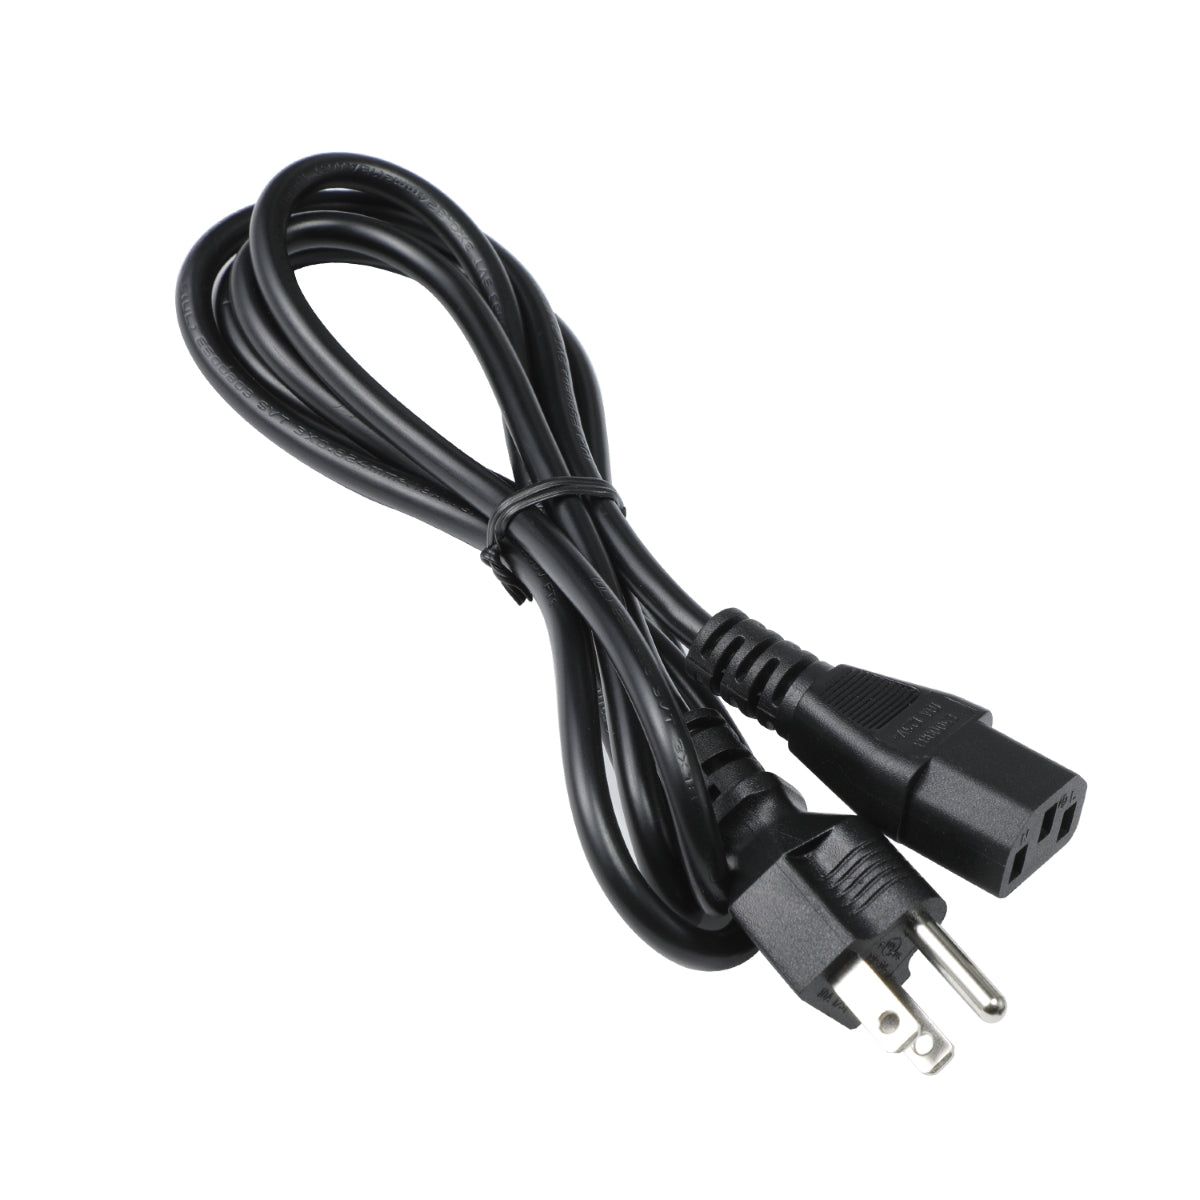 Power Cord for HP Pavilion 550-010 Computer.